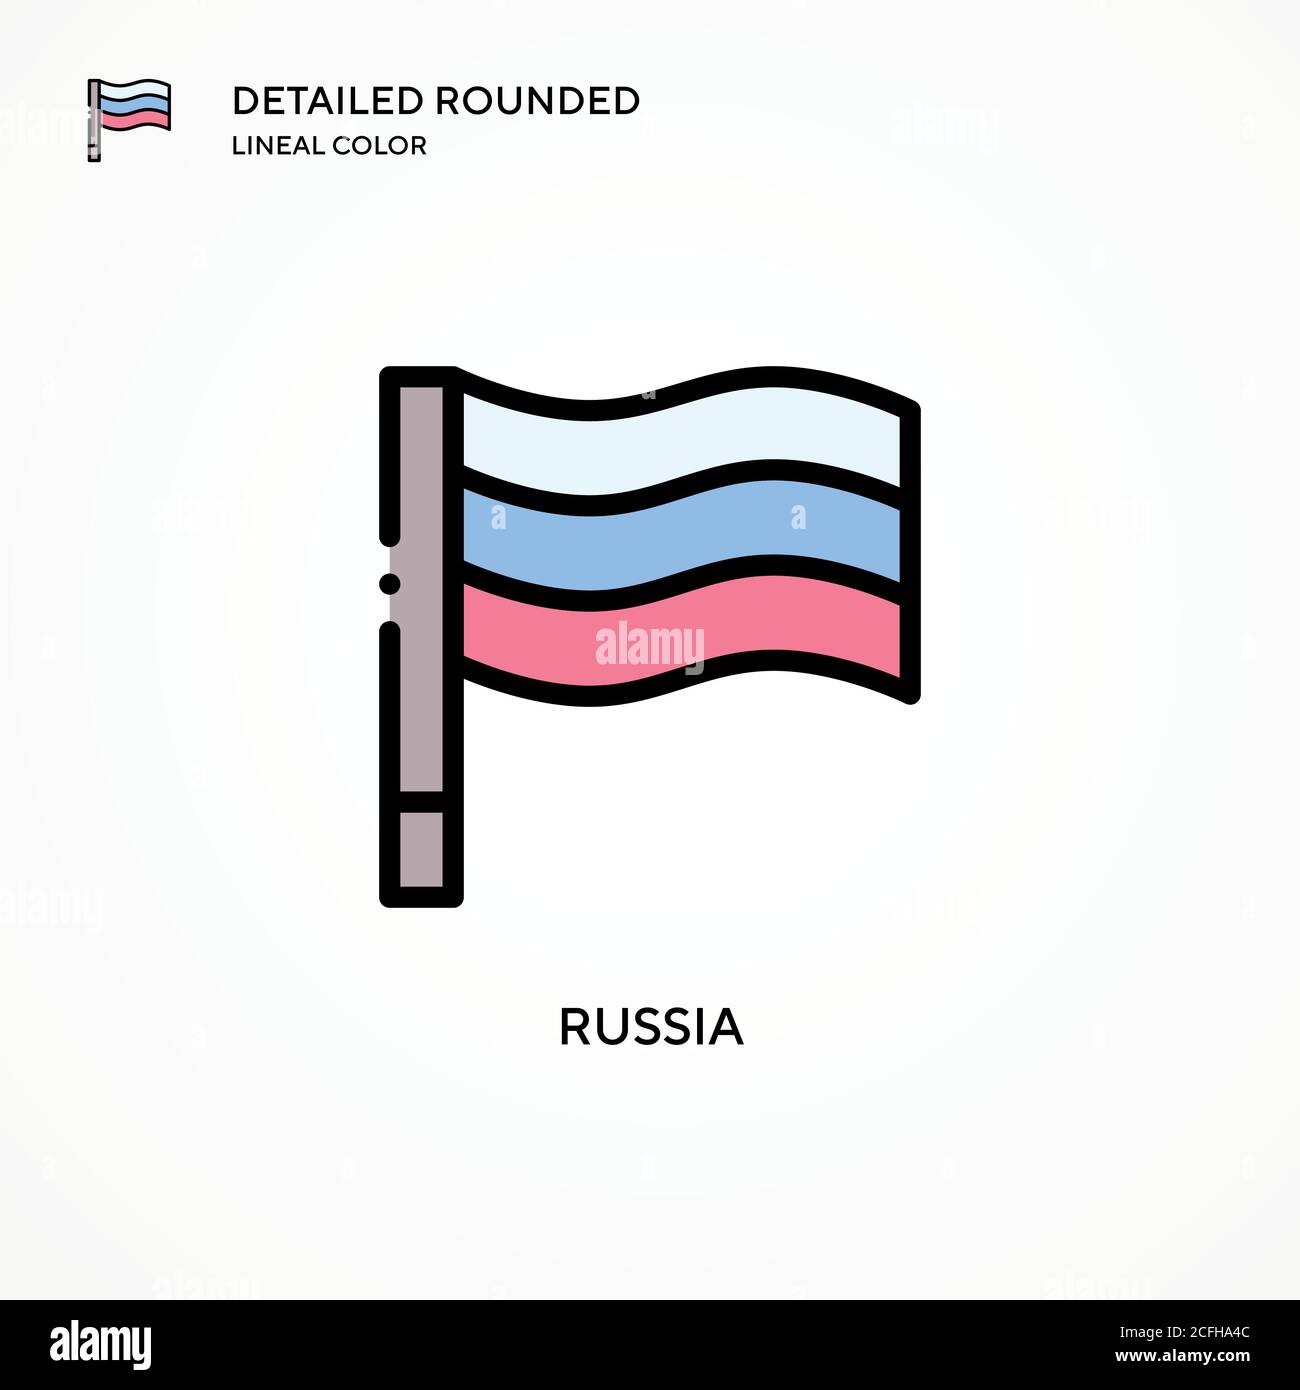 Russian Flag Emoji coloring page